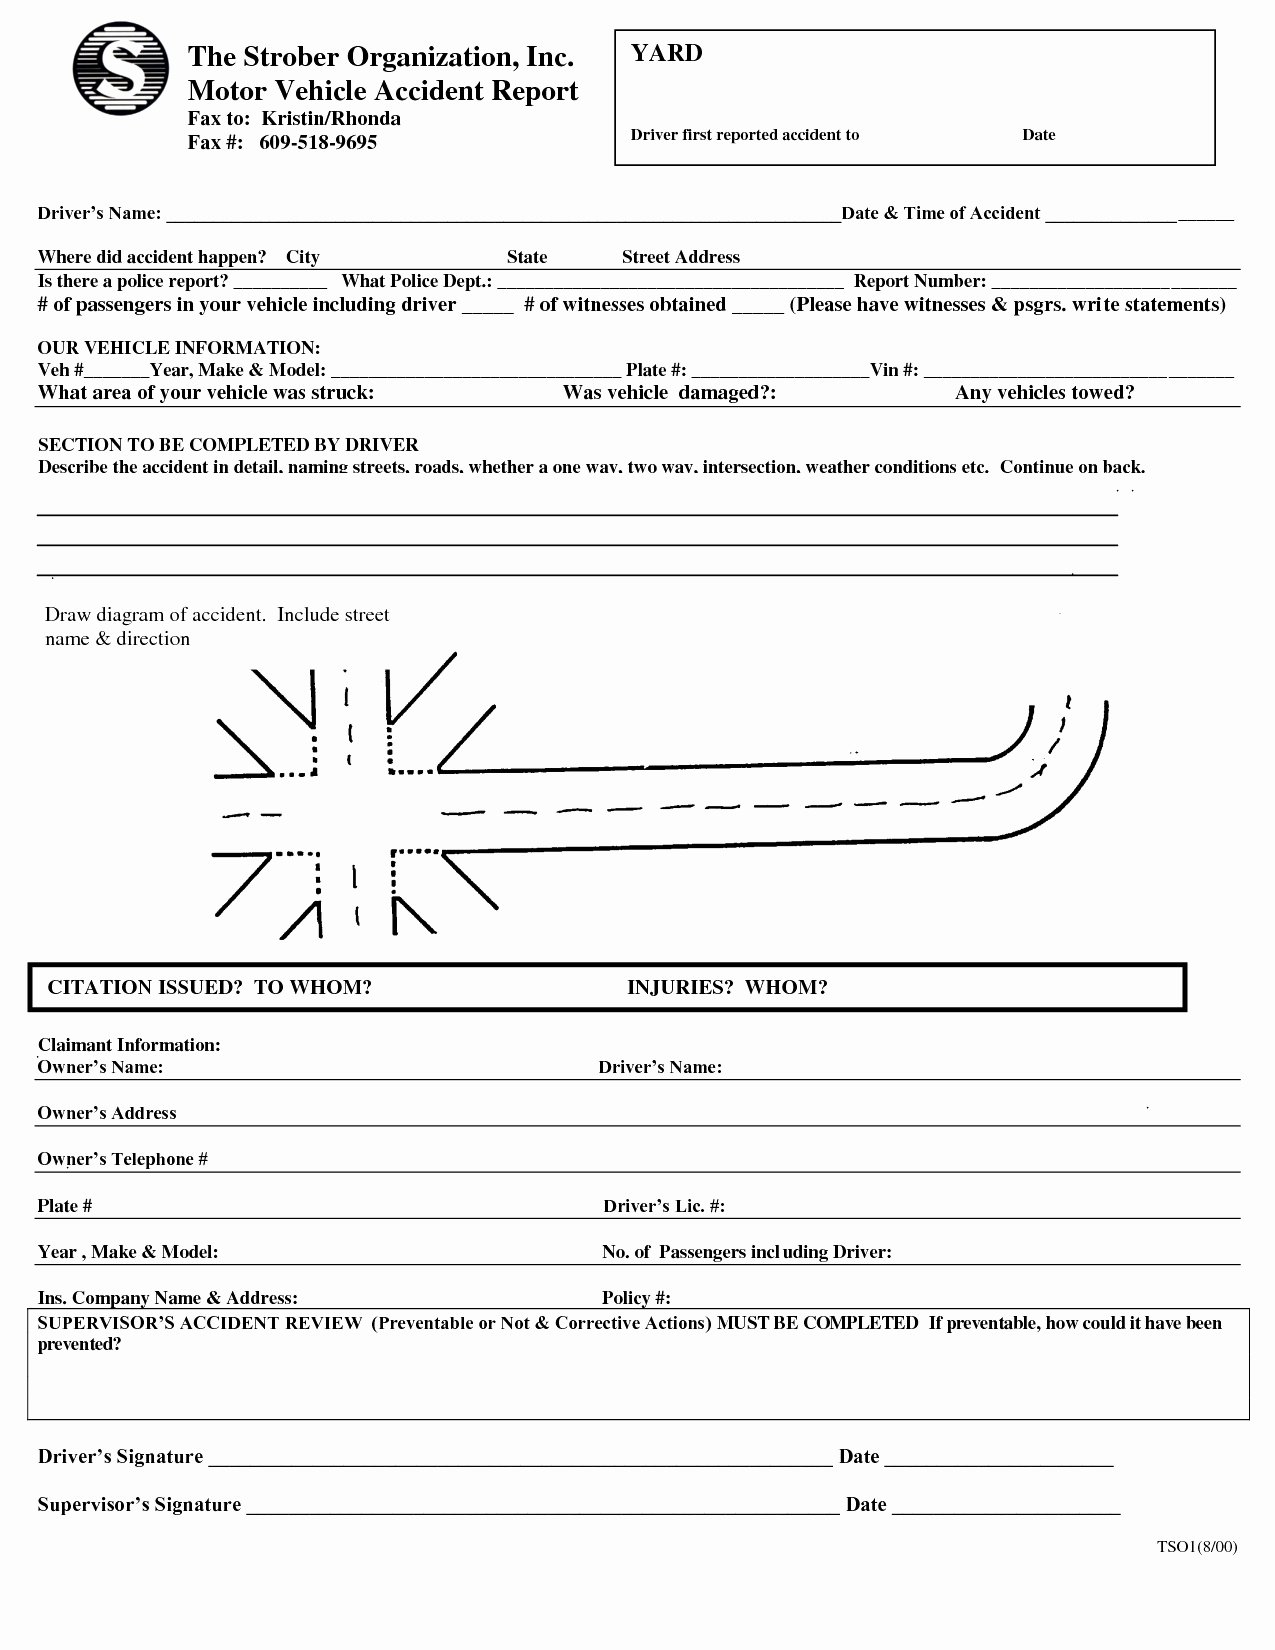 Automobile Accident form Inspirational Fake Police Report Car Accident